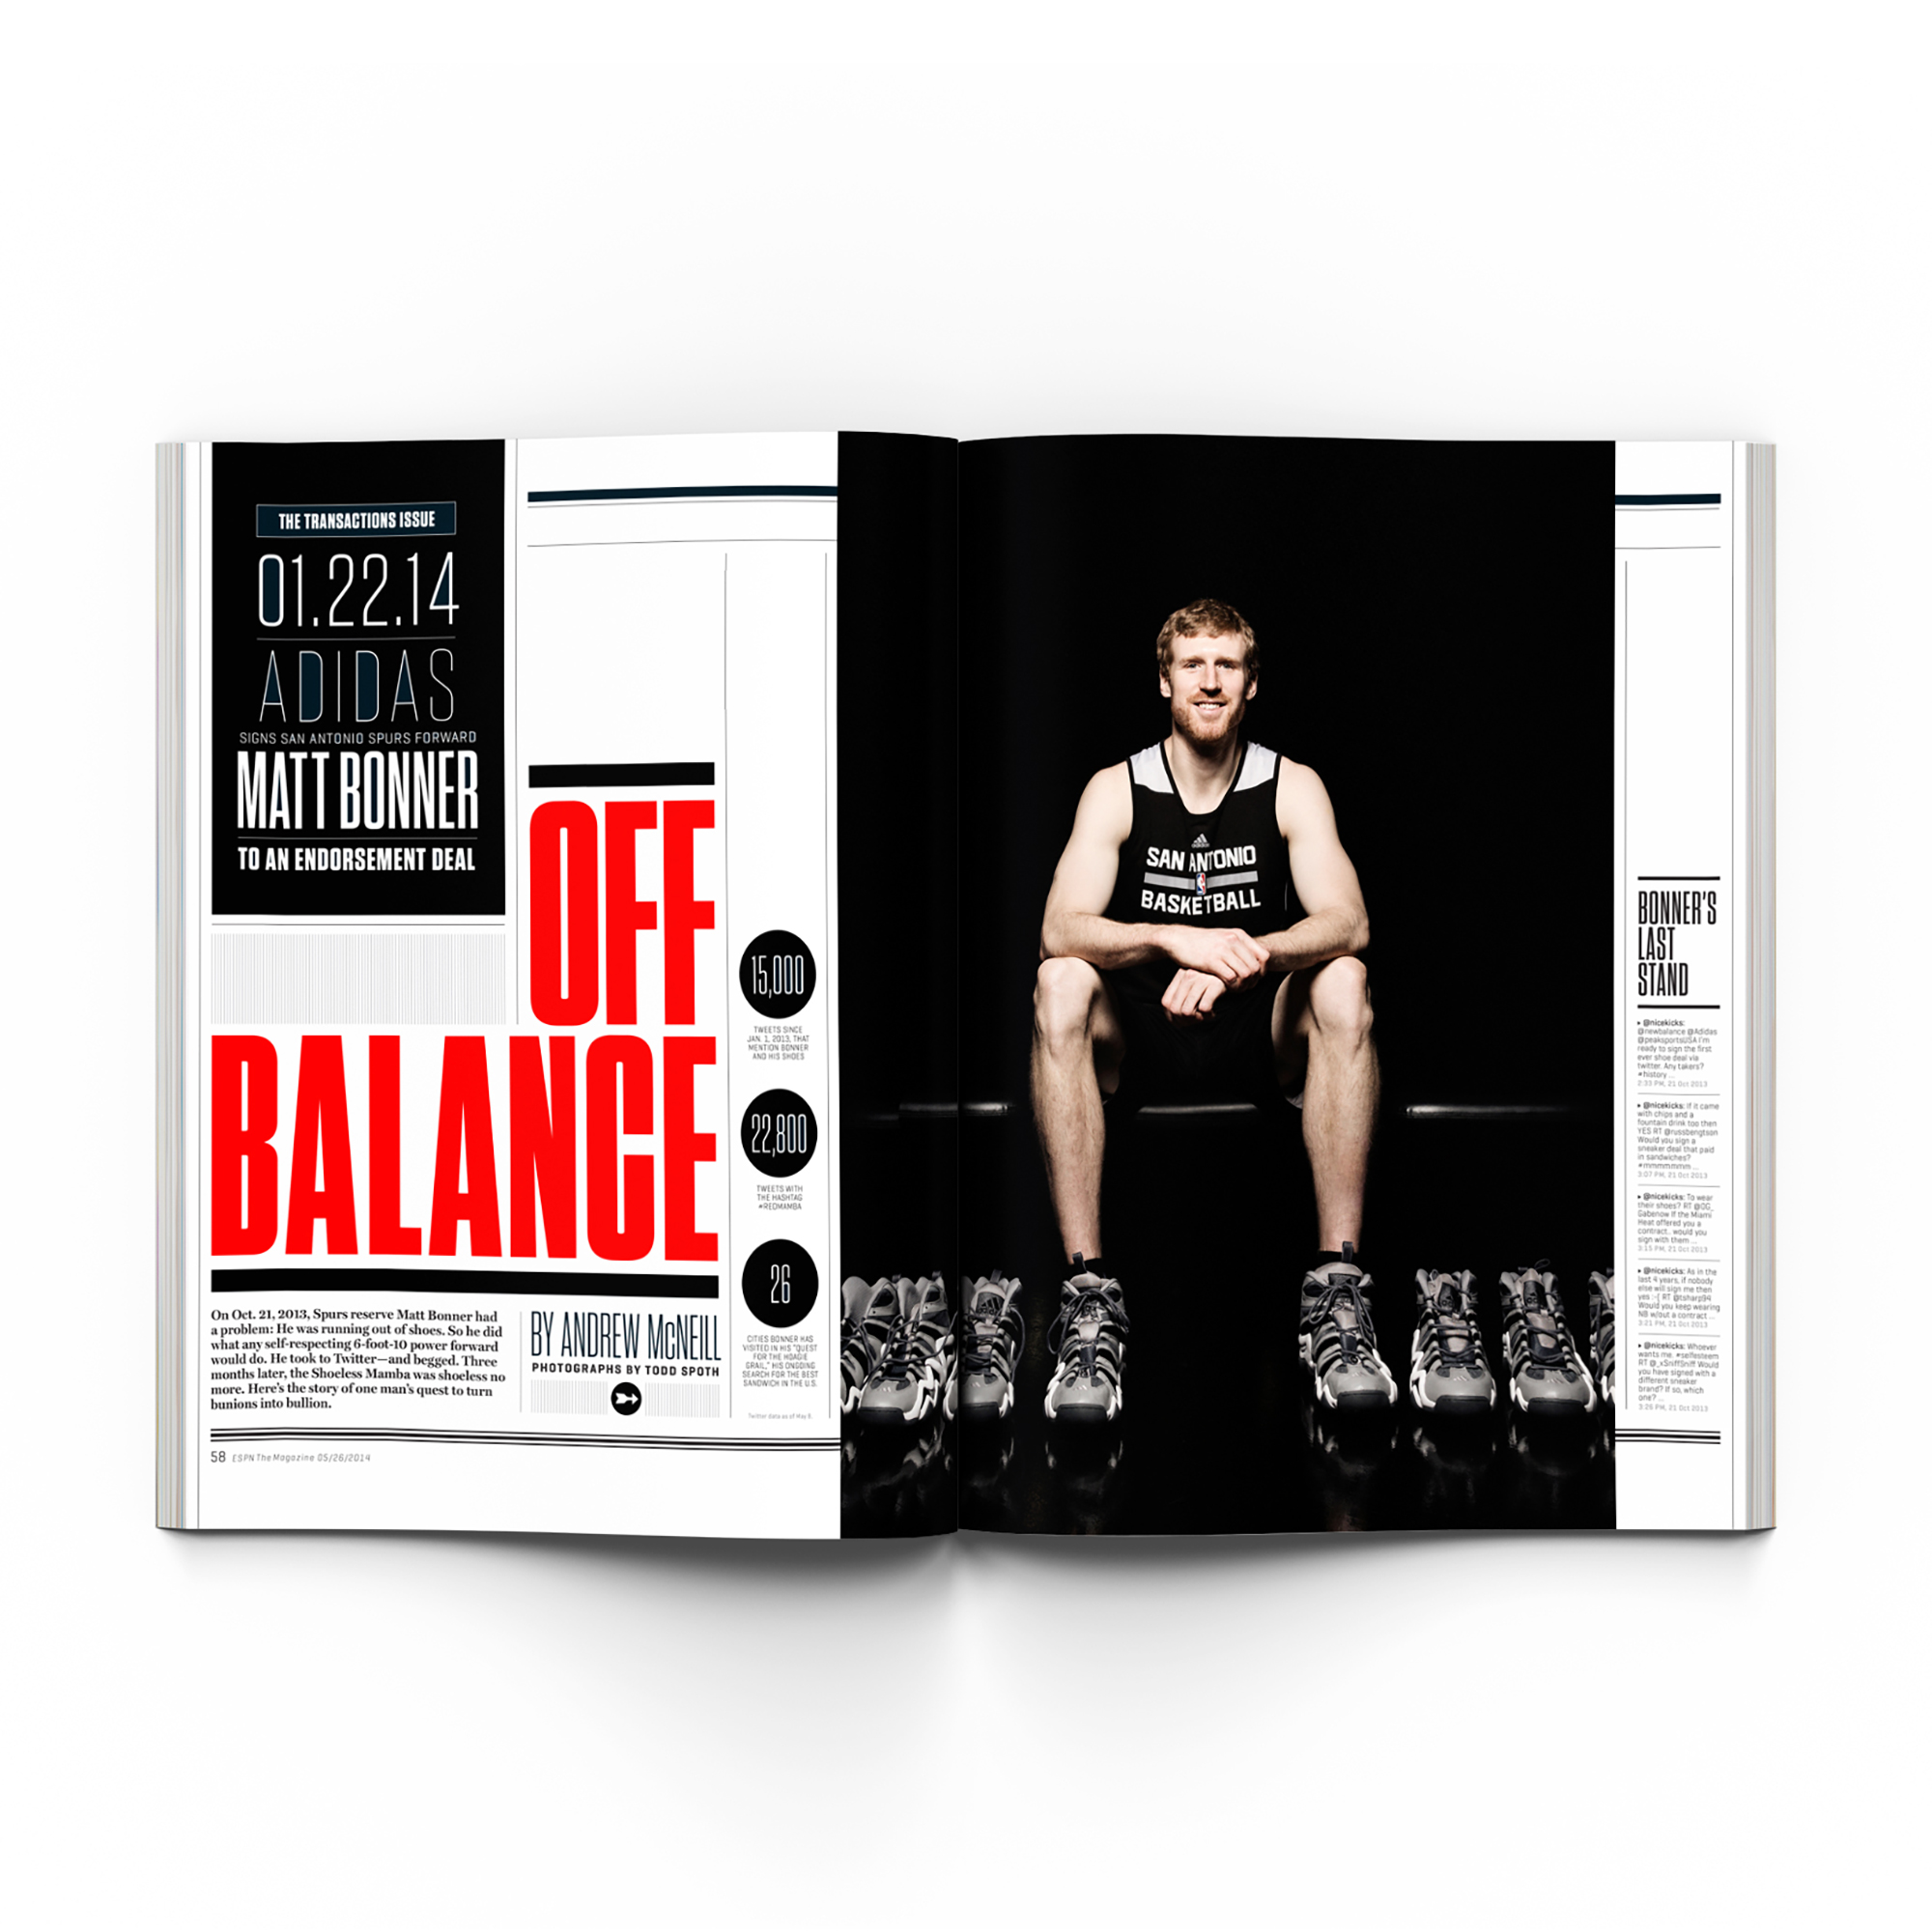 Matt Bonner, NBA player for the San Antonio Spurs, photographed for ESPN the Magazine by sports photographer, Todd Spoth, in San Antonio, Texas.